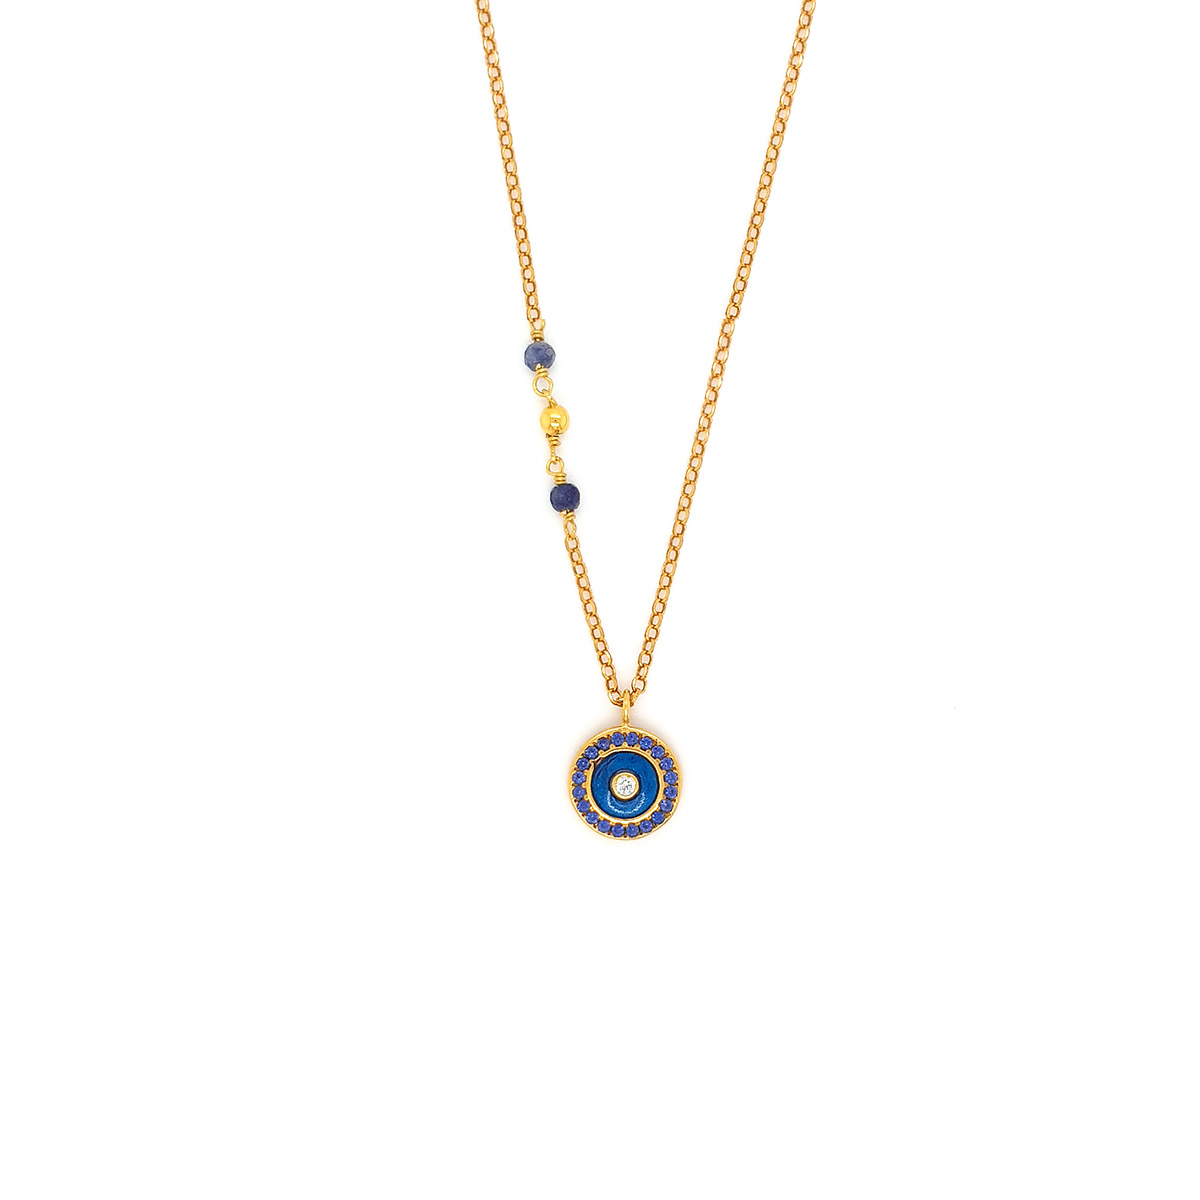 Sterling silver Gold Plated Eye necklace